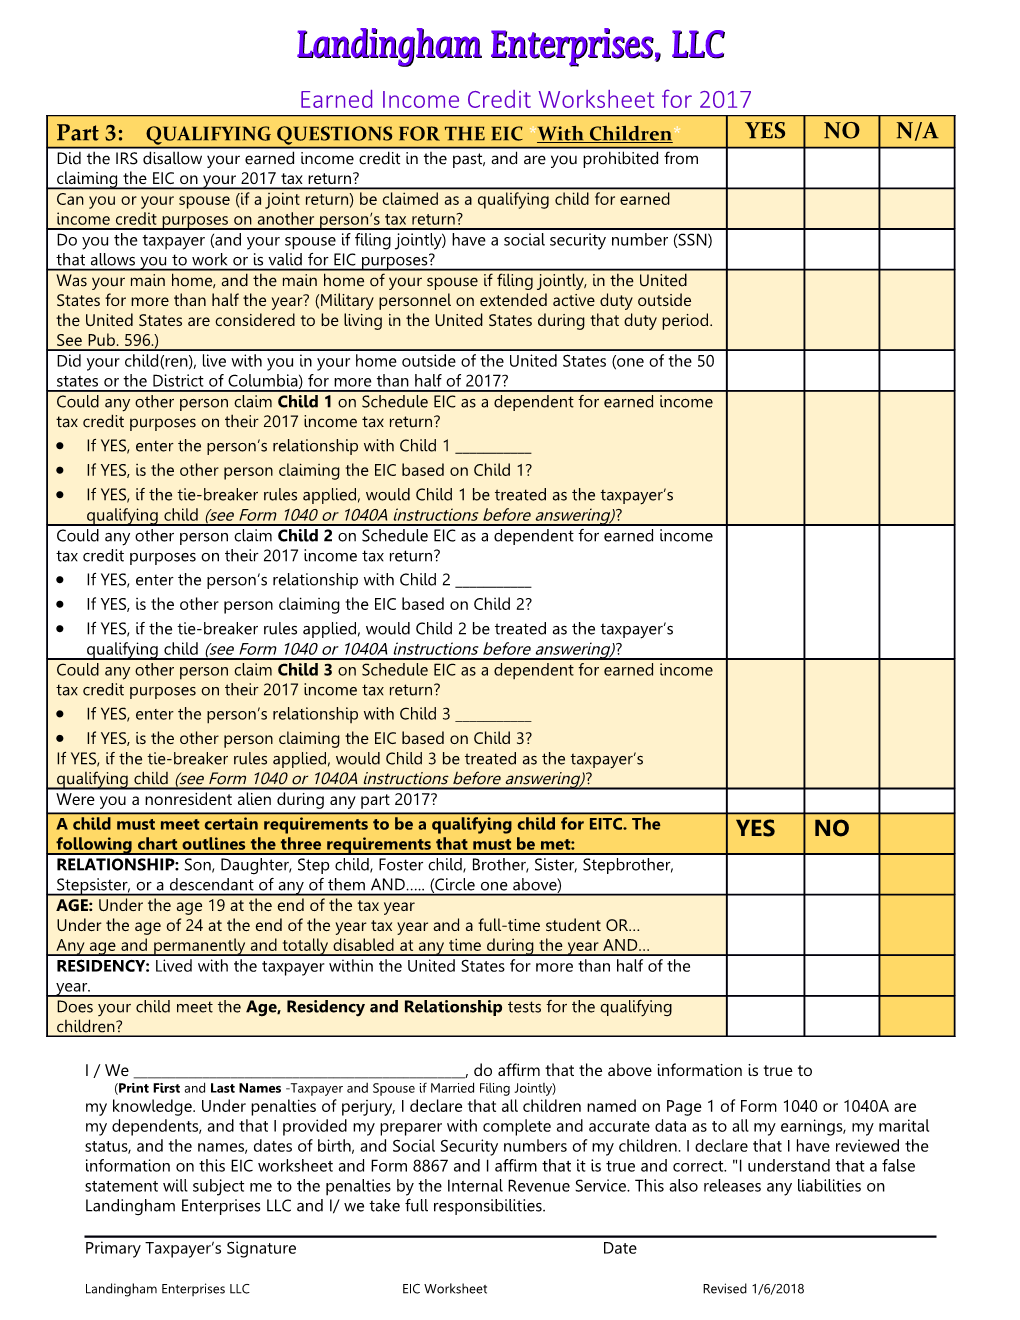 Earned Income Credit Worksheet for 2017